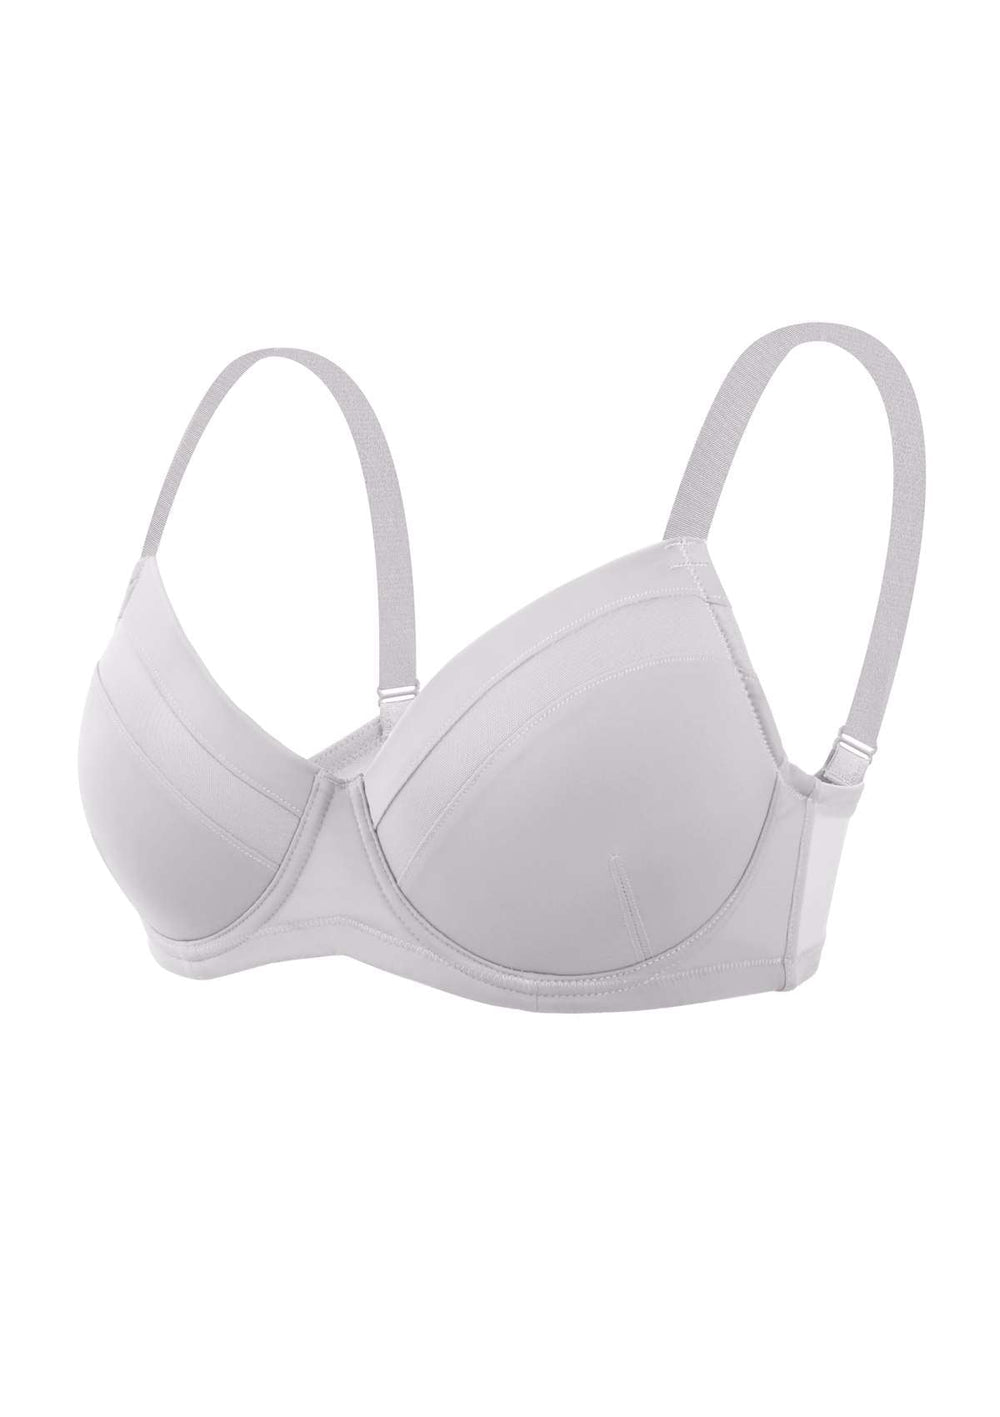 Bra Fit for Seniors: Finding Comfort and Support at Every Age, by Hsia  Lingerie